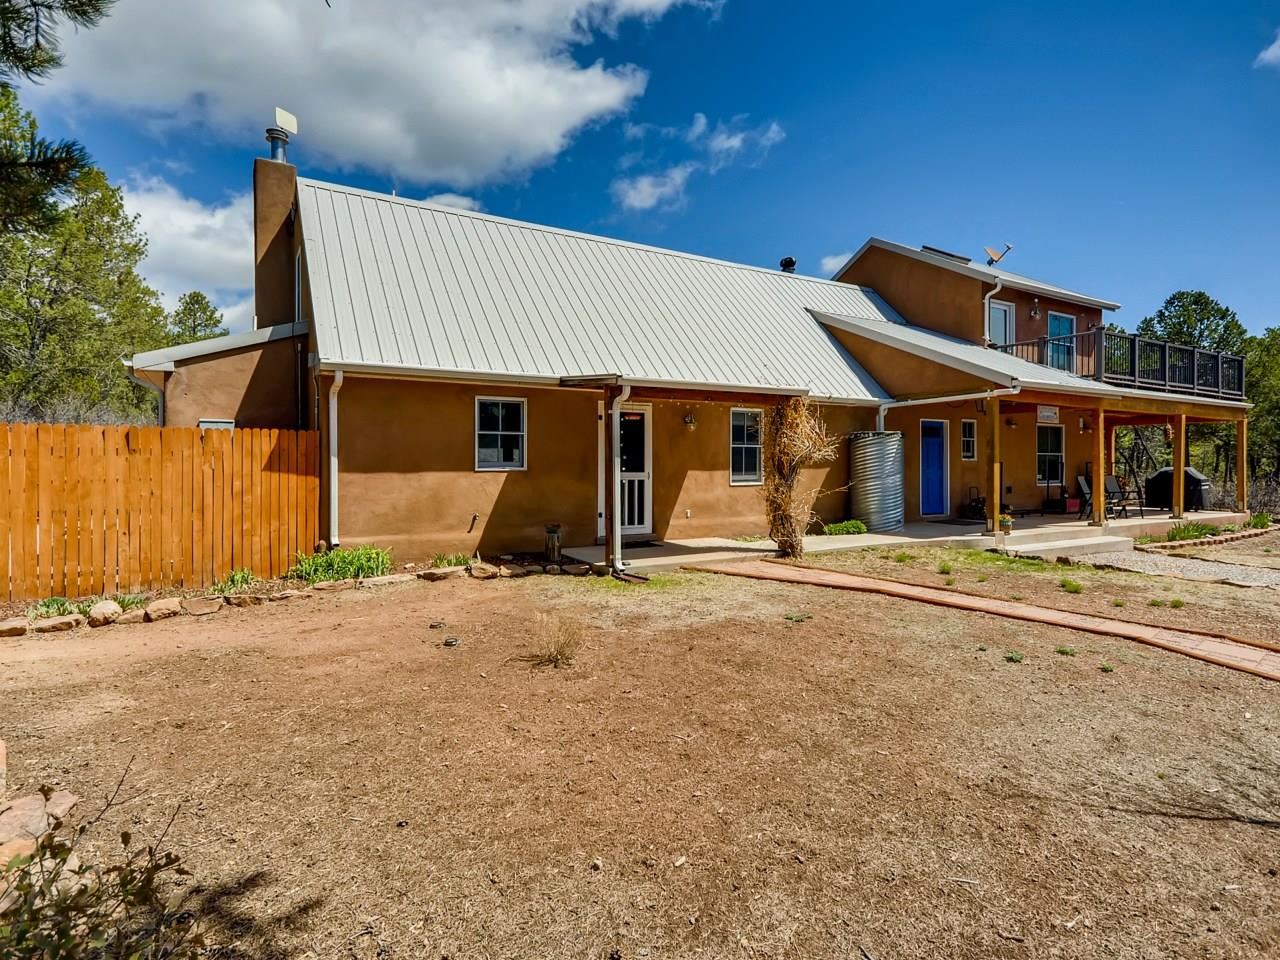 41 Trail, Glorieta, New Mexico 87535, 3 Bedrooms Bedrooms, ,4 BathroomsBathrooms,Residential,For Sale,41 Trail,202101912